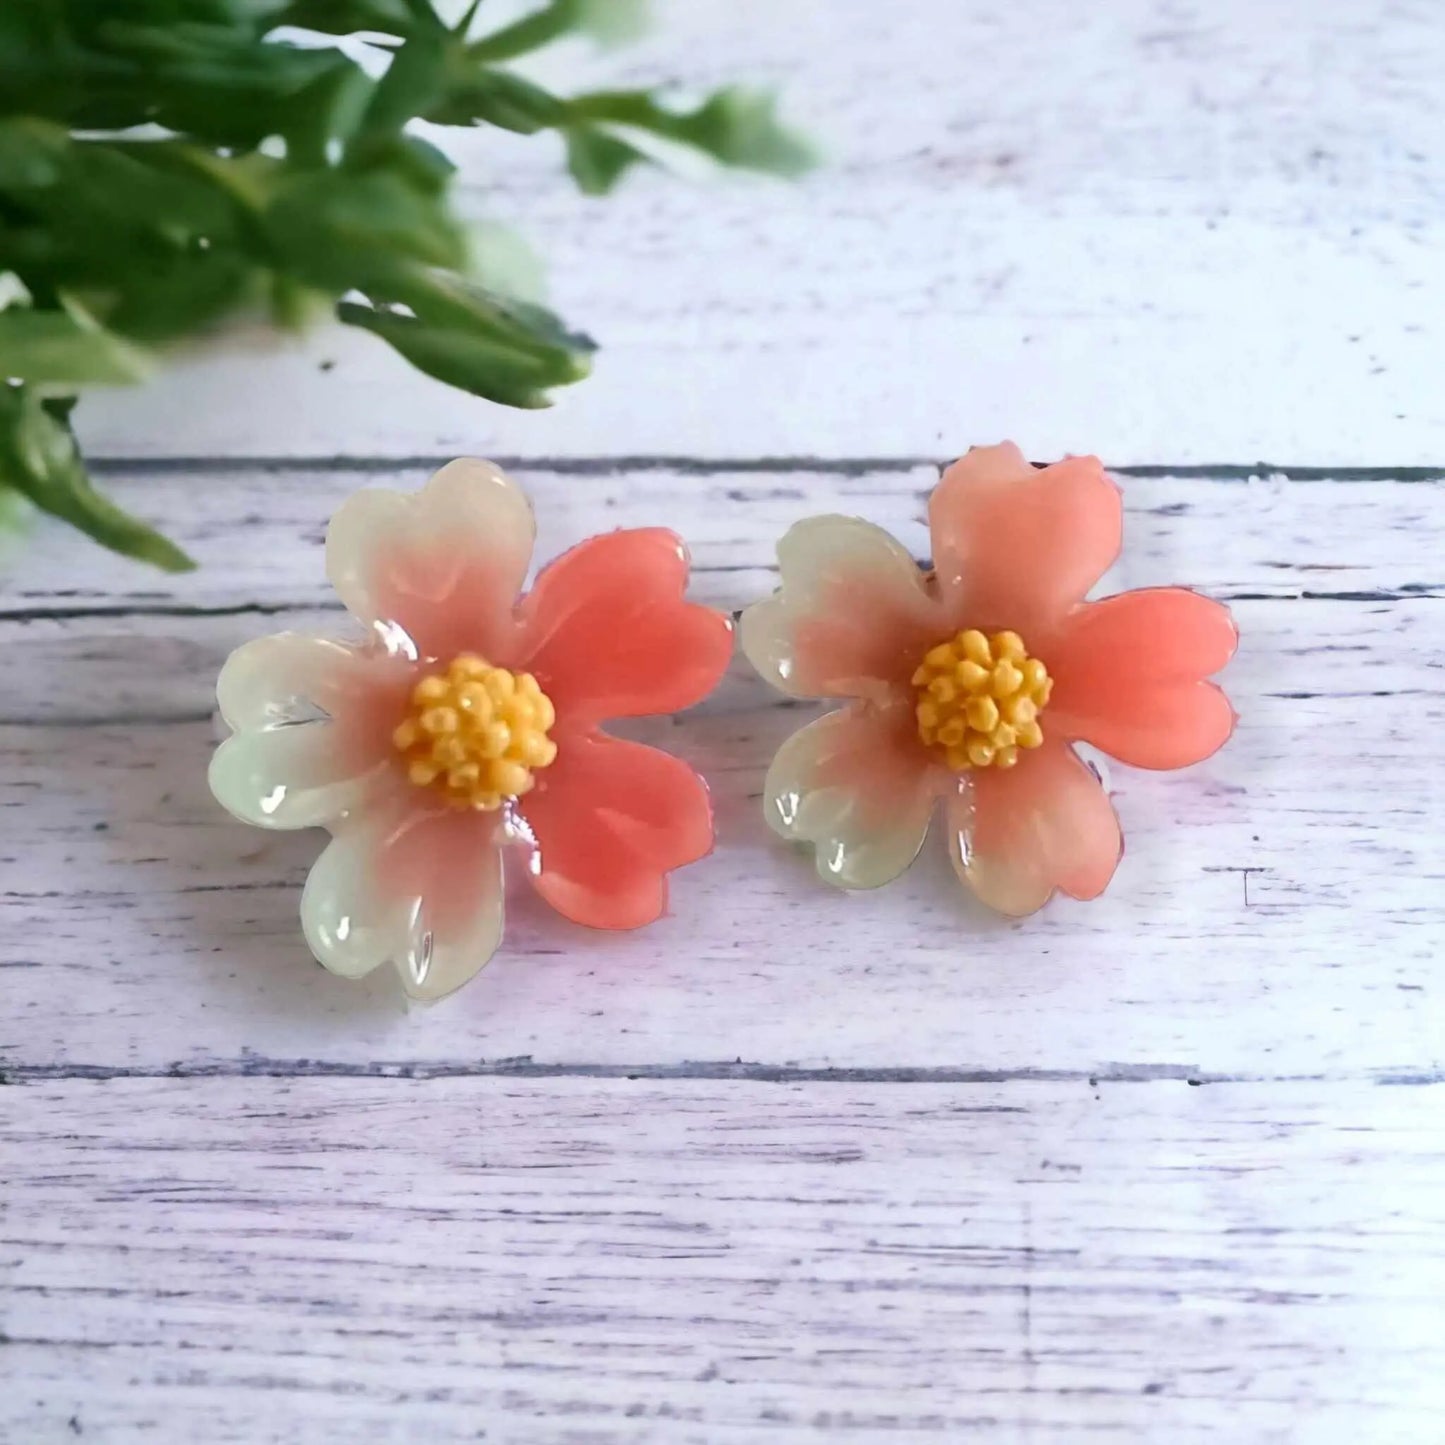 Peach Green Flower Resin Earrings - Novelty Fashion Statement for the Unique Aussie Shopper!